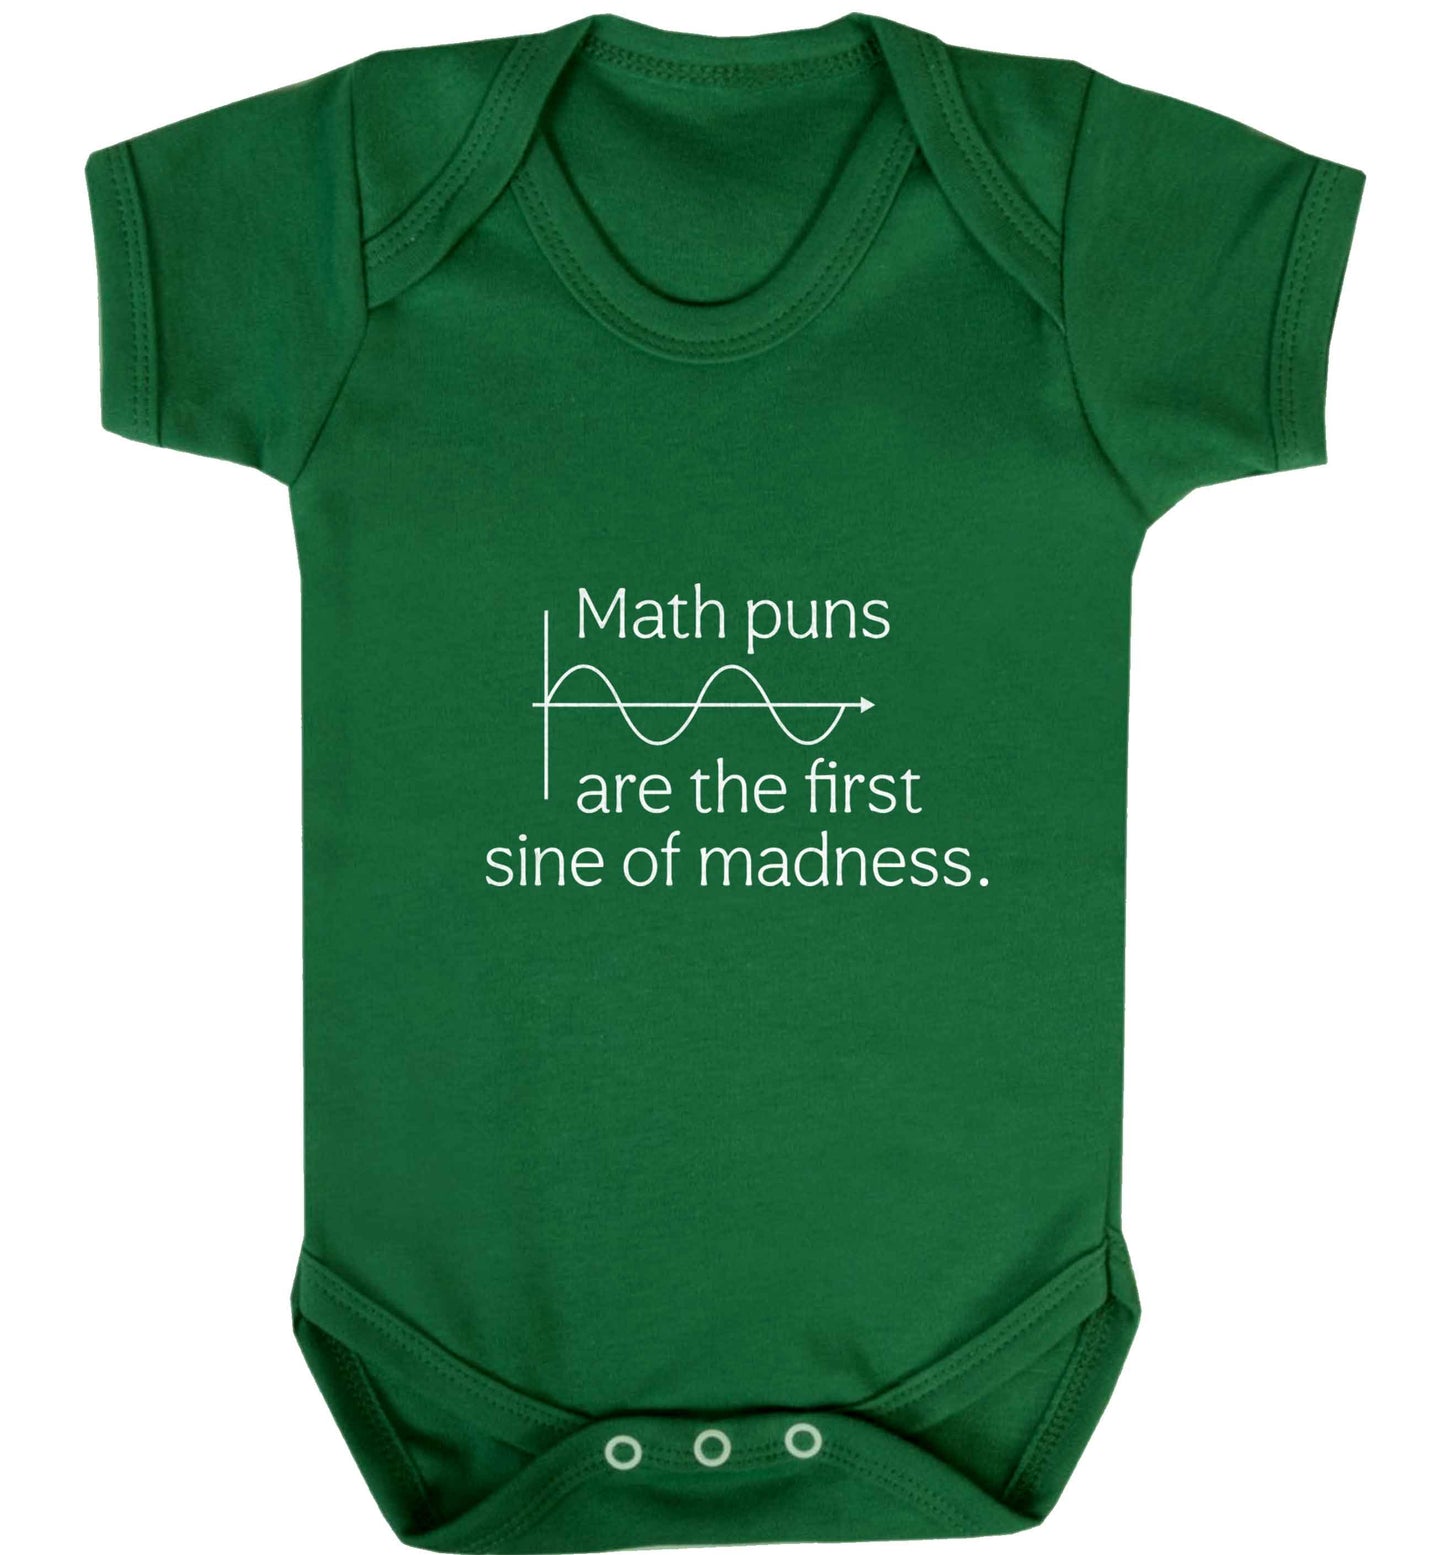 Math puns are the first sine of madness baby vest green 18-24 months